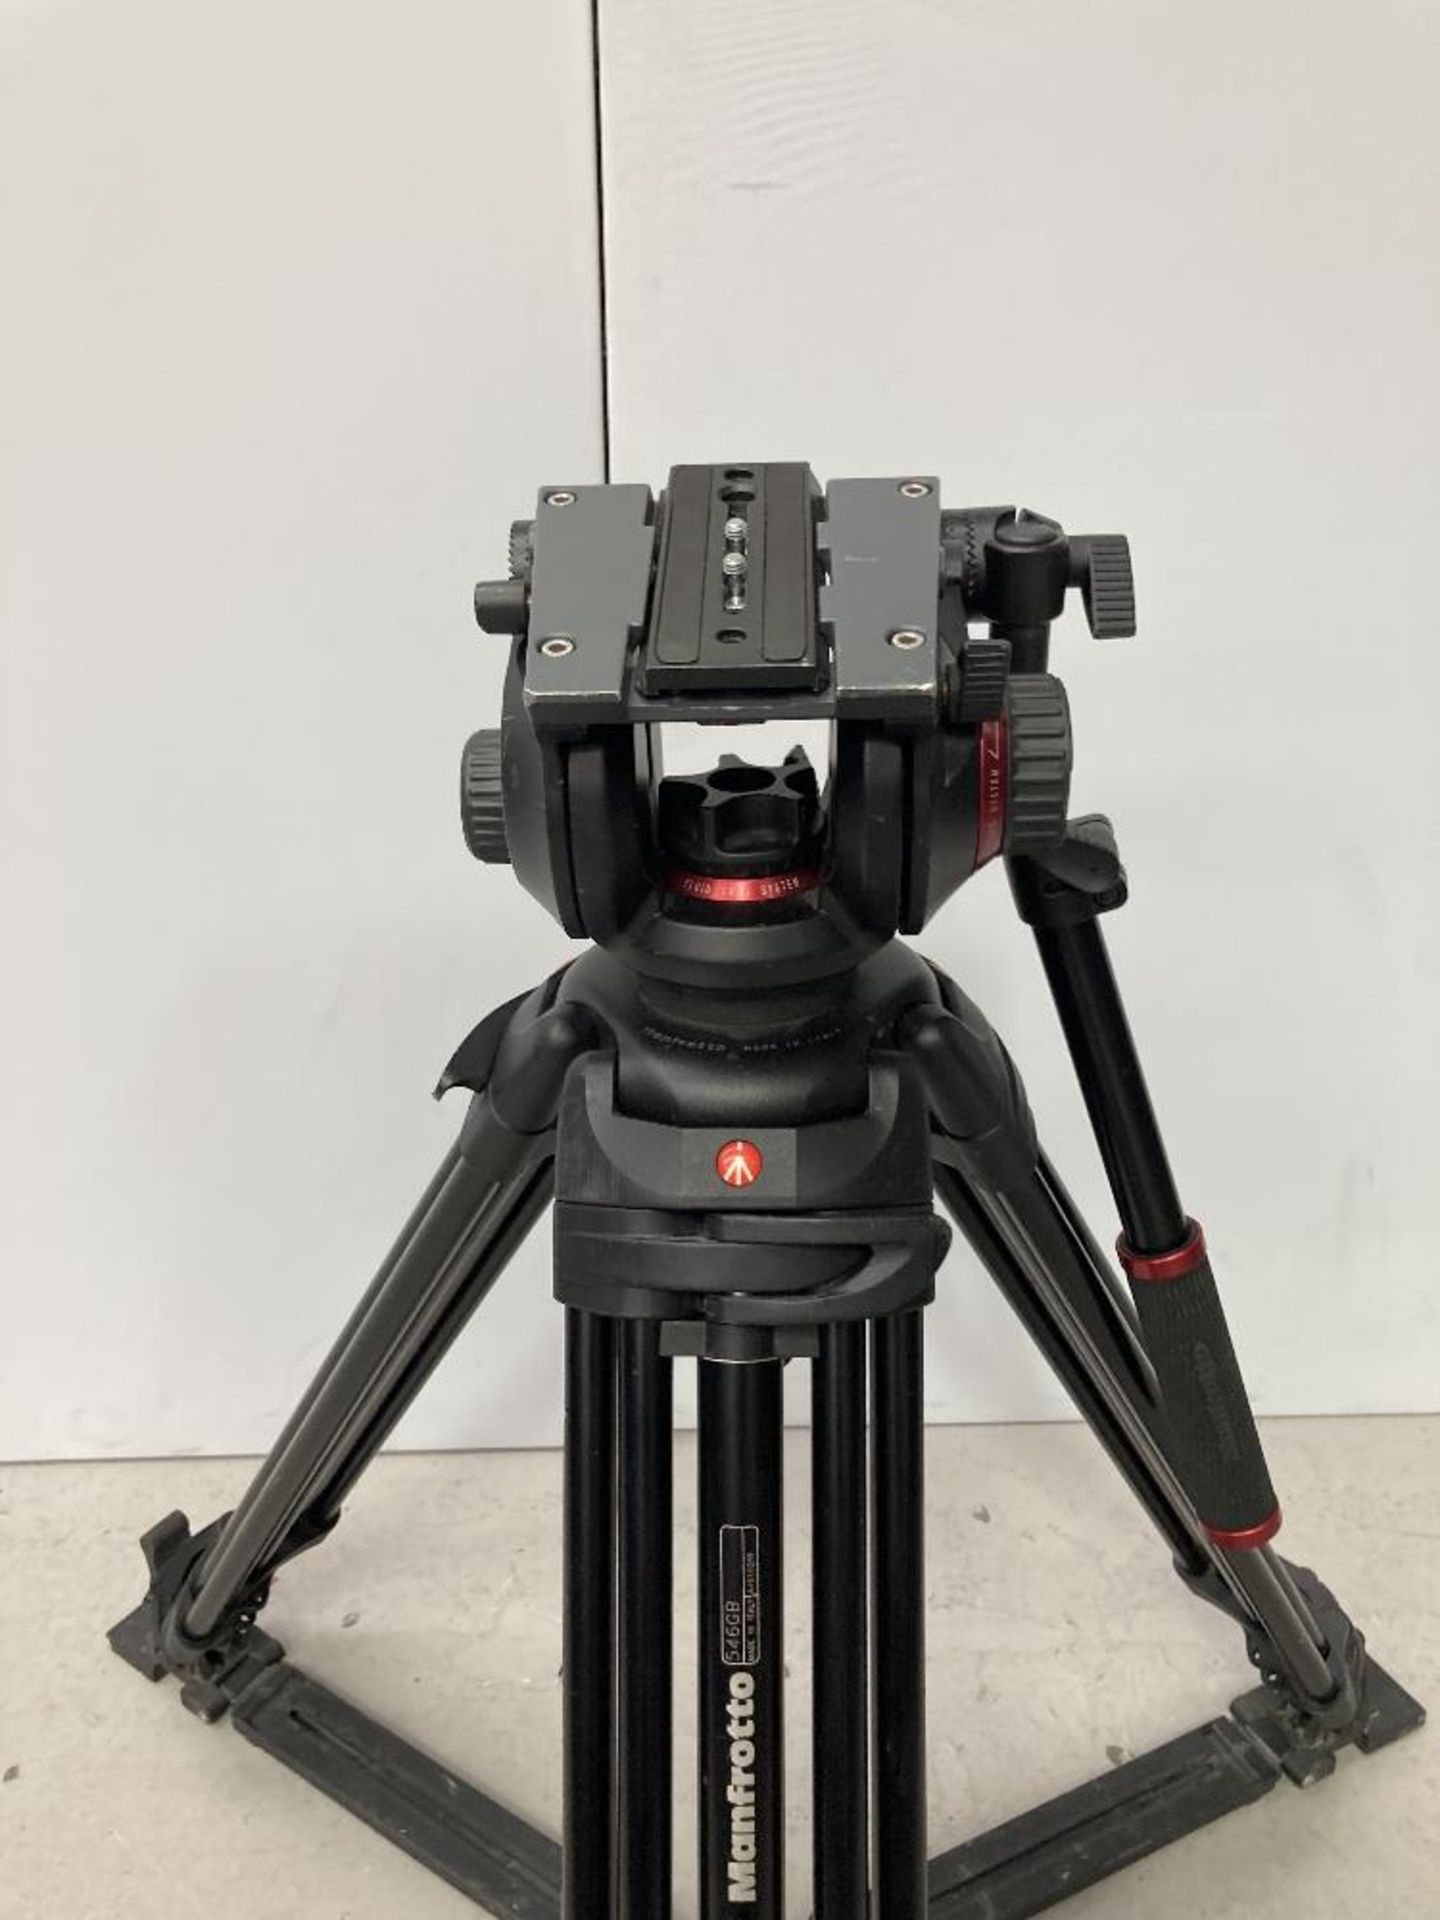 Manfrotto 504HD Tripod Head and 546GB Tripod with Carbon Fibre Legs - Image 4 of 7